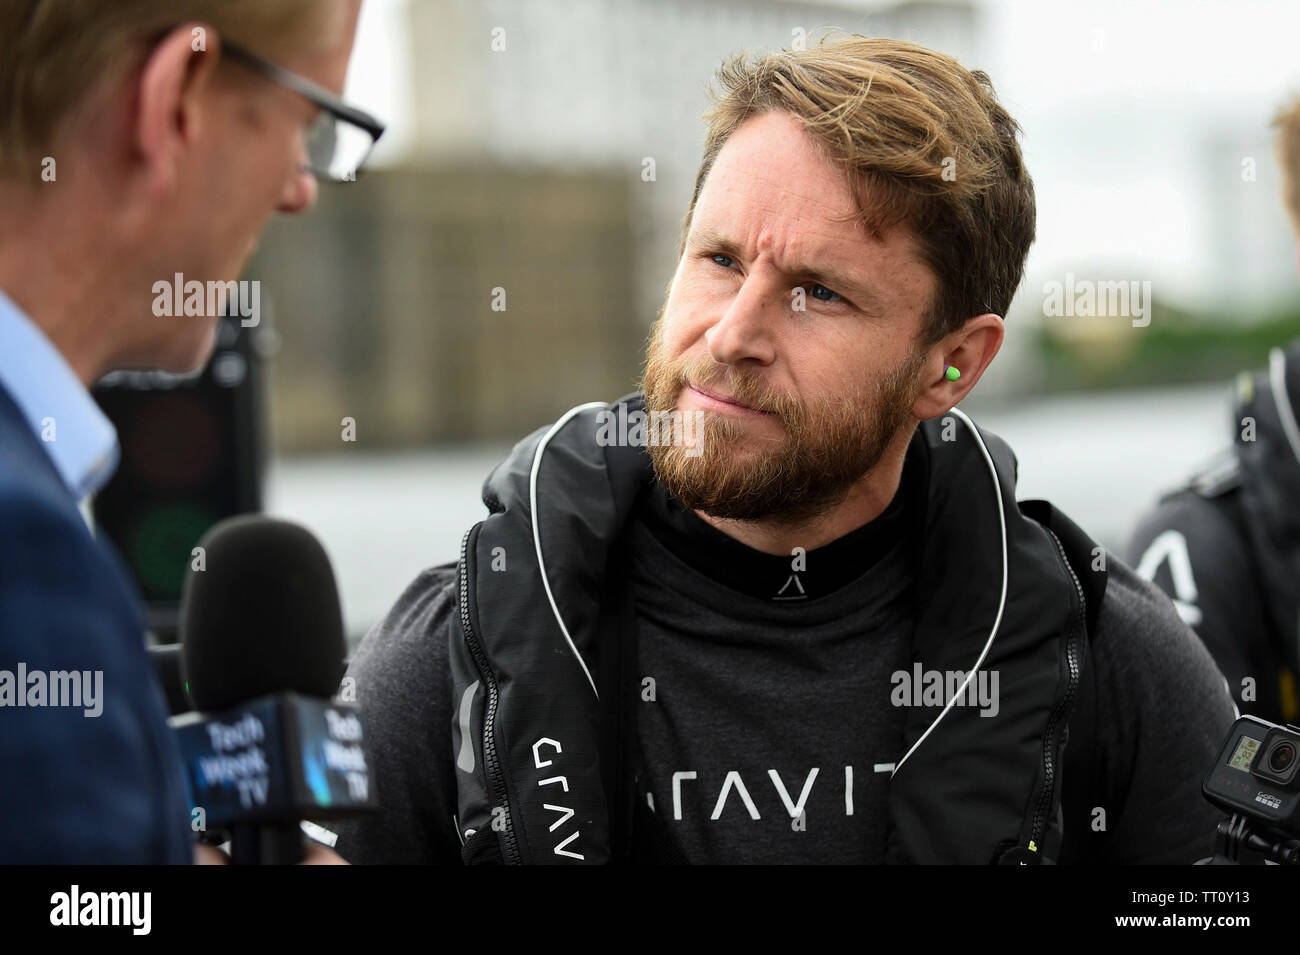 London, UK.  13 June 2019.  Richard Browning the Founder and Chief Test Pilot of Gravity Industries and ‘real life Iron Man’ gives a media interview to preview their Race Series concept at Royal Victoria Docks, East London, during London Tech Week 2019, ahead of the launch of Gravity Industries’ International Race Series in early 2020.  Gravity Industries are the designers, builders and pilots of the world’s first patented Jet Suit, pioneering a new era of human flight. Credit: Stephen Chung / Alamy Live News Stock Photo